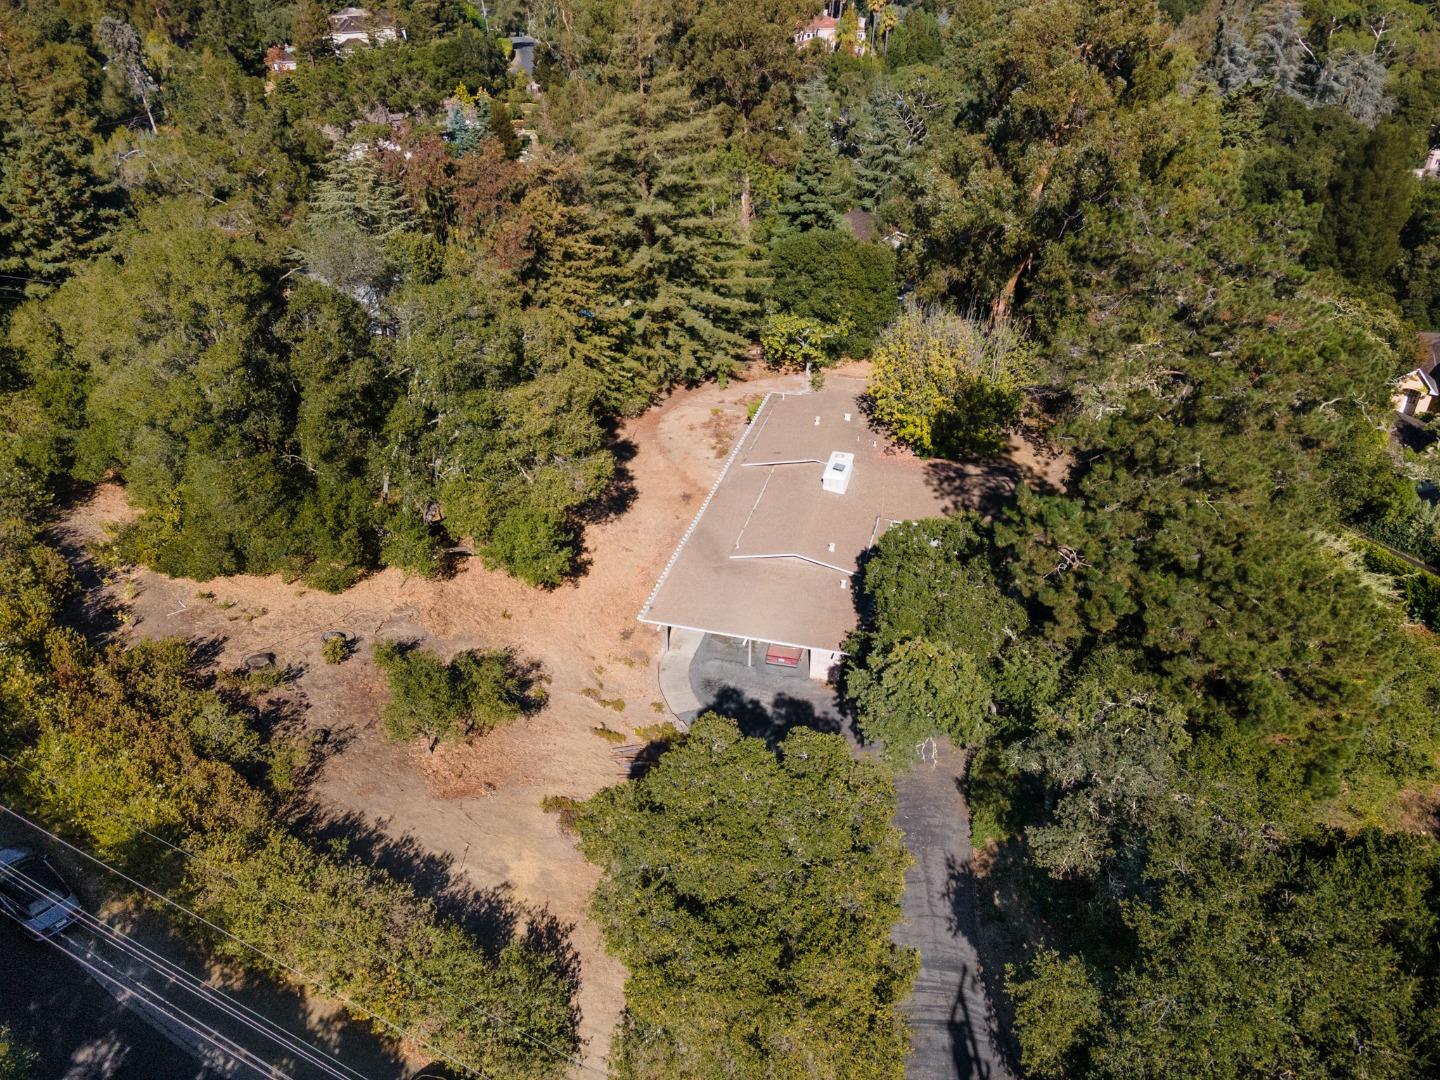 BUILD YOUR DREAM ESTATE!!  LAND VALUE. Amazing one acre property in a quiet and peaceful cul-de-sac surrounded by luxurious estates.  Easy access to 280, Sand Hill Road, Downtown Menlo Park and Palo Alto. Las Lomitas Schools.